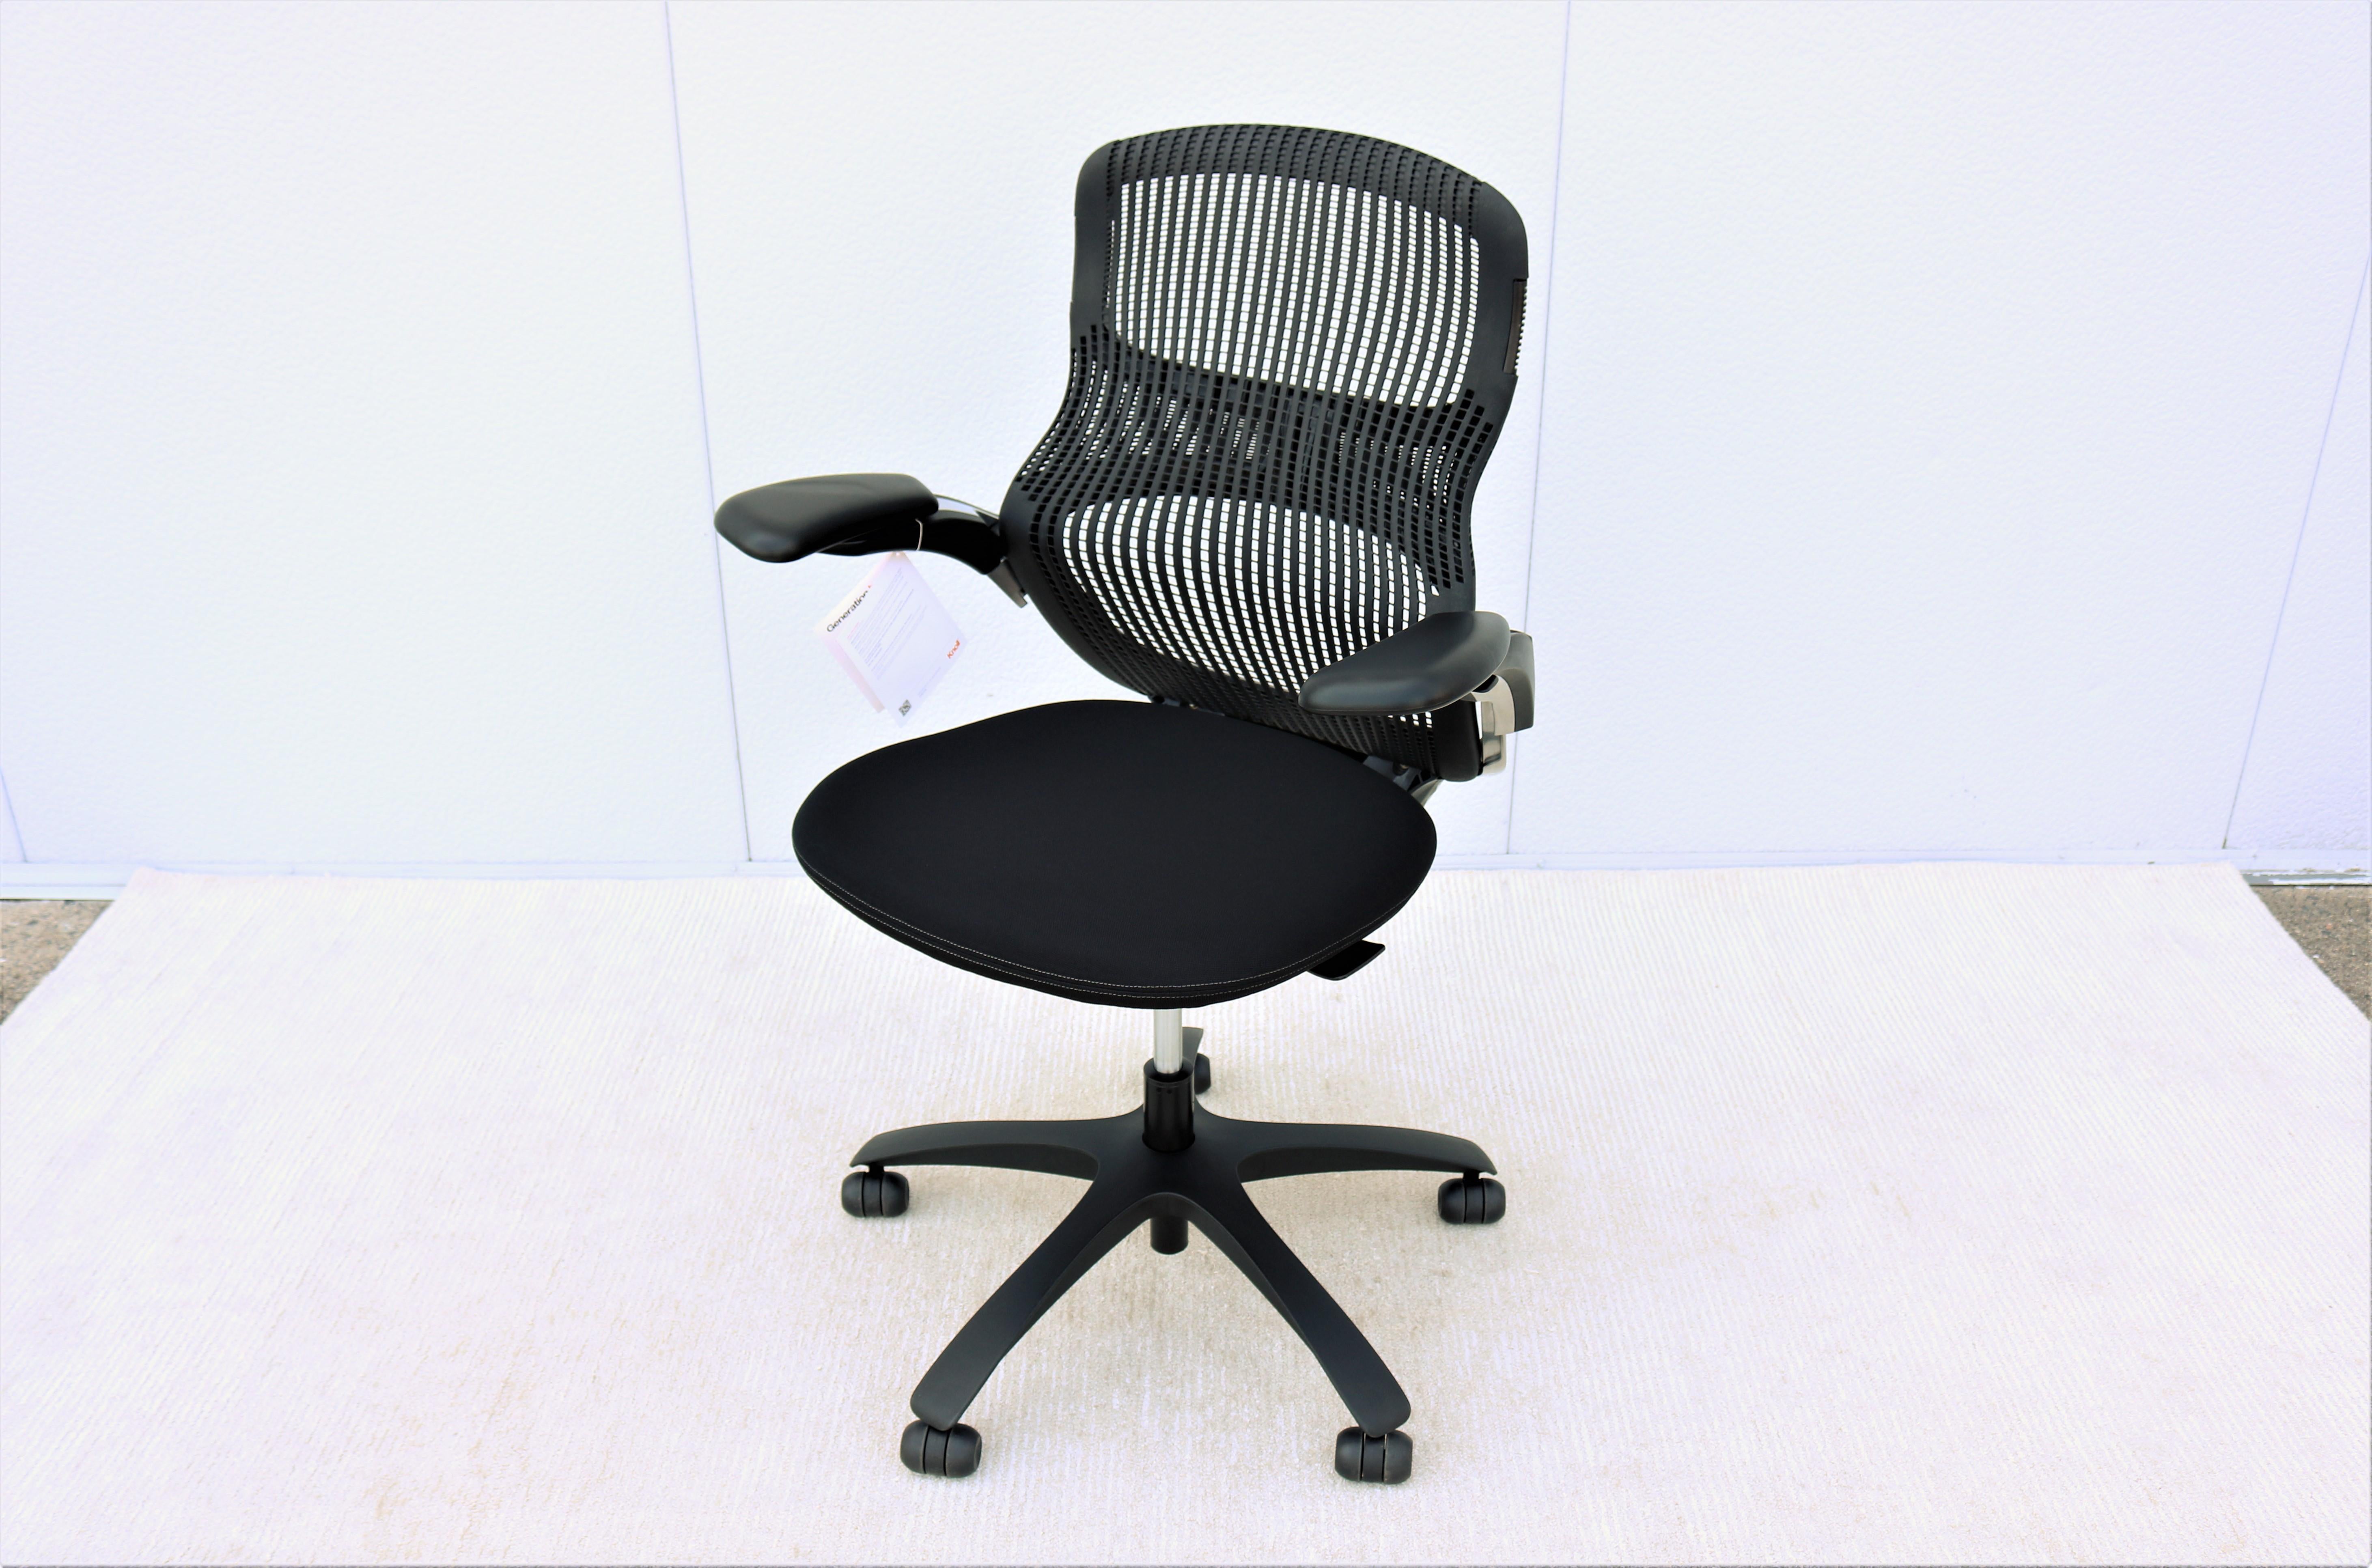 American Knoll Generation Black Ergonomic Office Desk Chair Fully Adjustable, Brand New For Sale